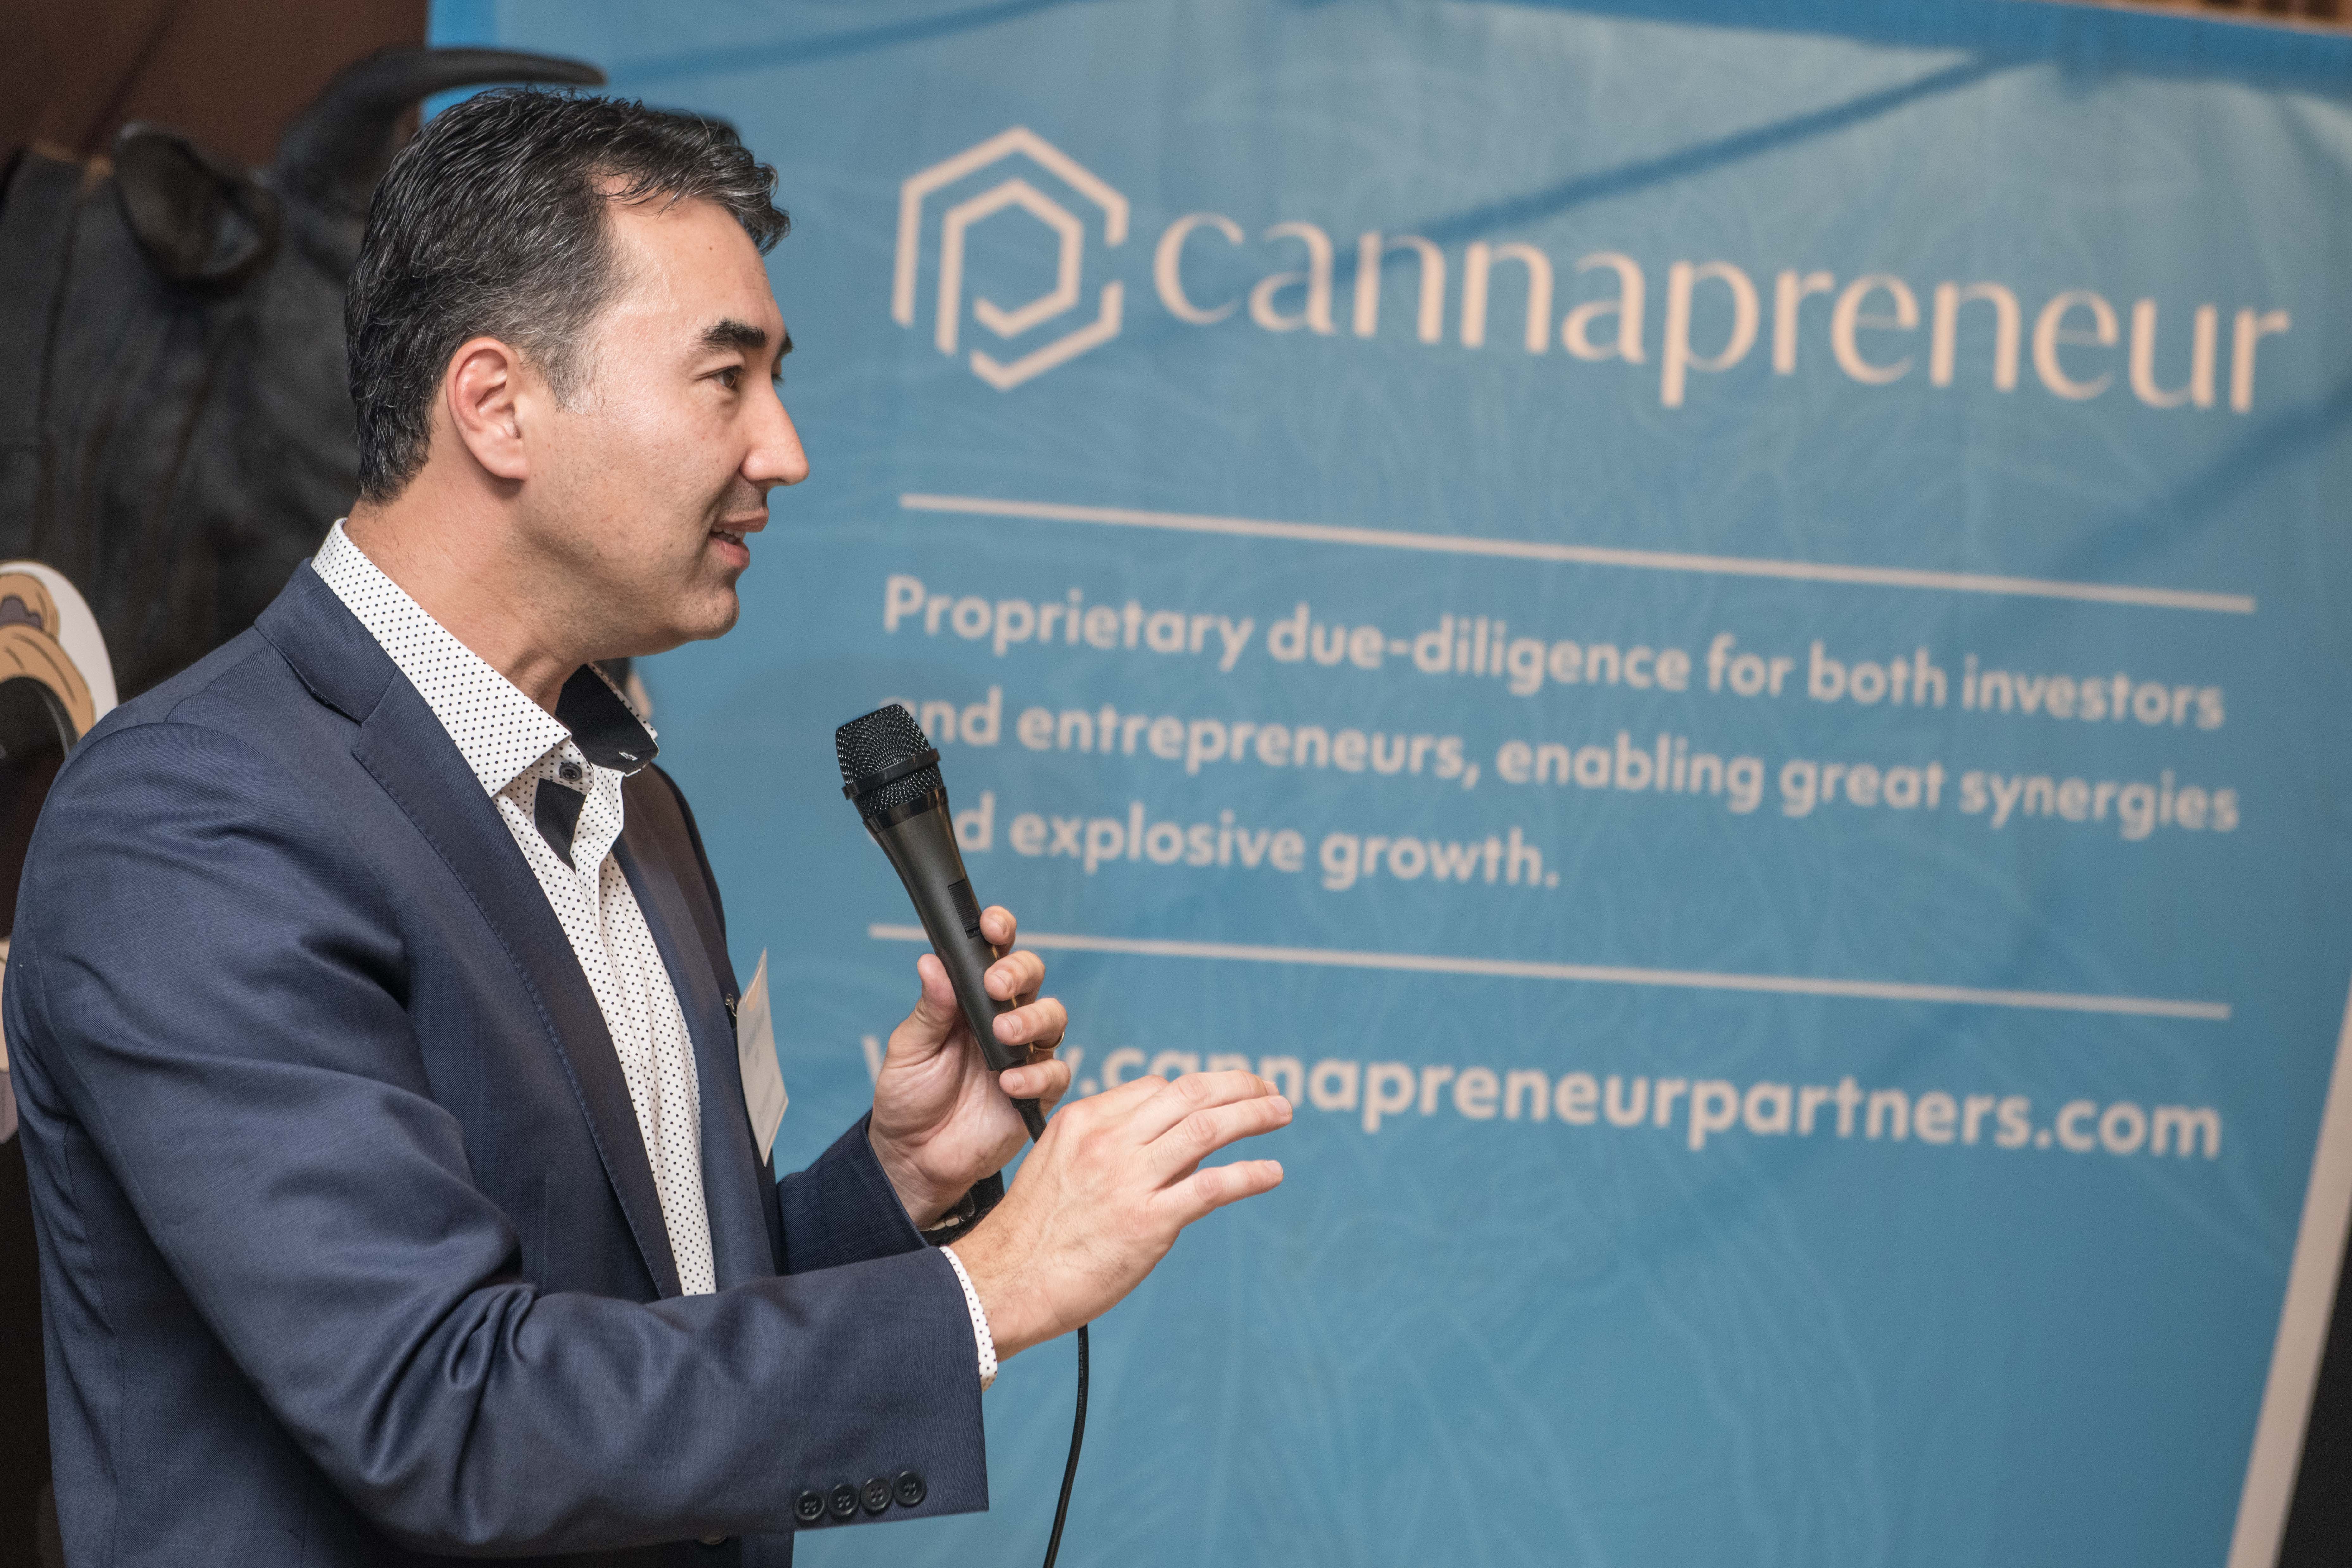 PODCAST: A PROFITS-WITH-PURPOSE CANNABIS INVESTING APPROACH WITH CANNAPRENEUR PARTNERS